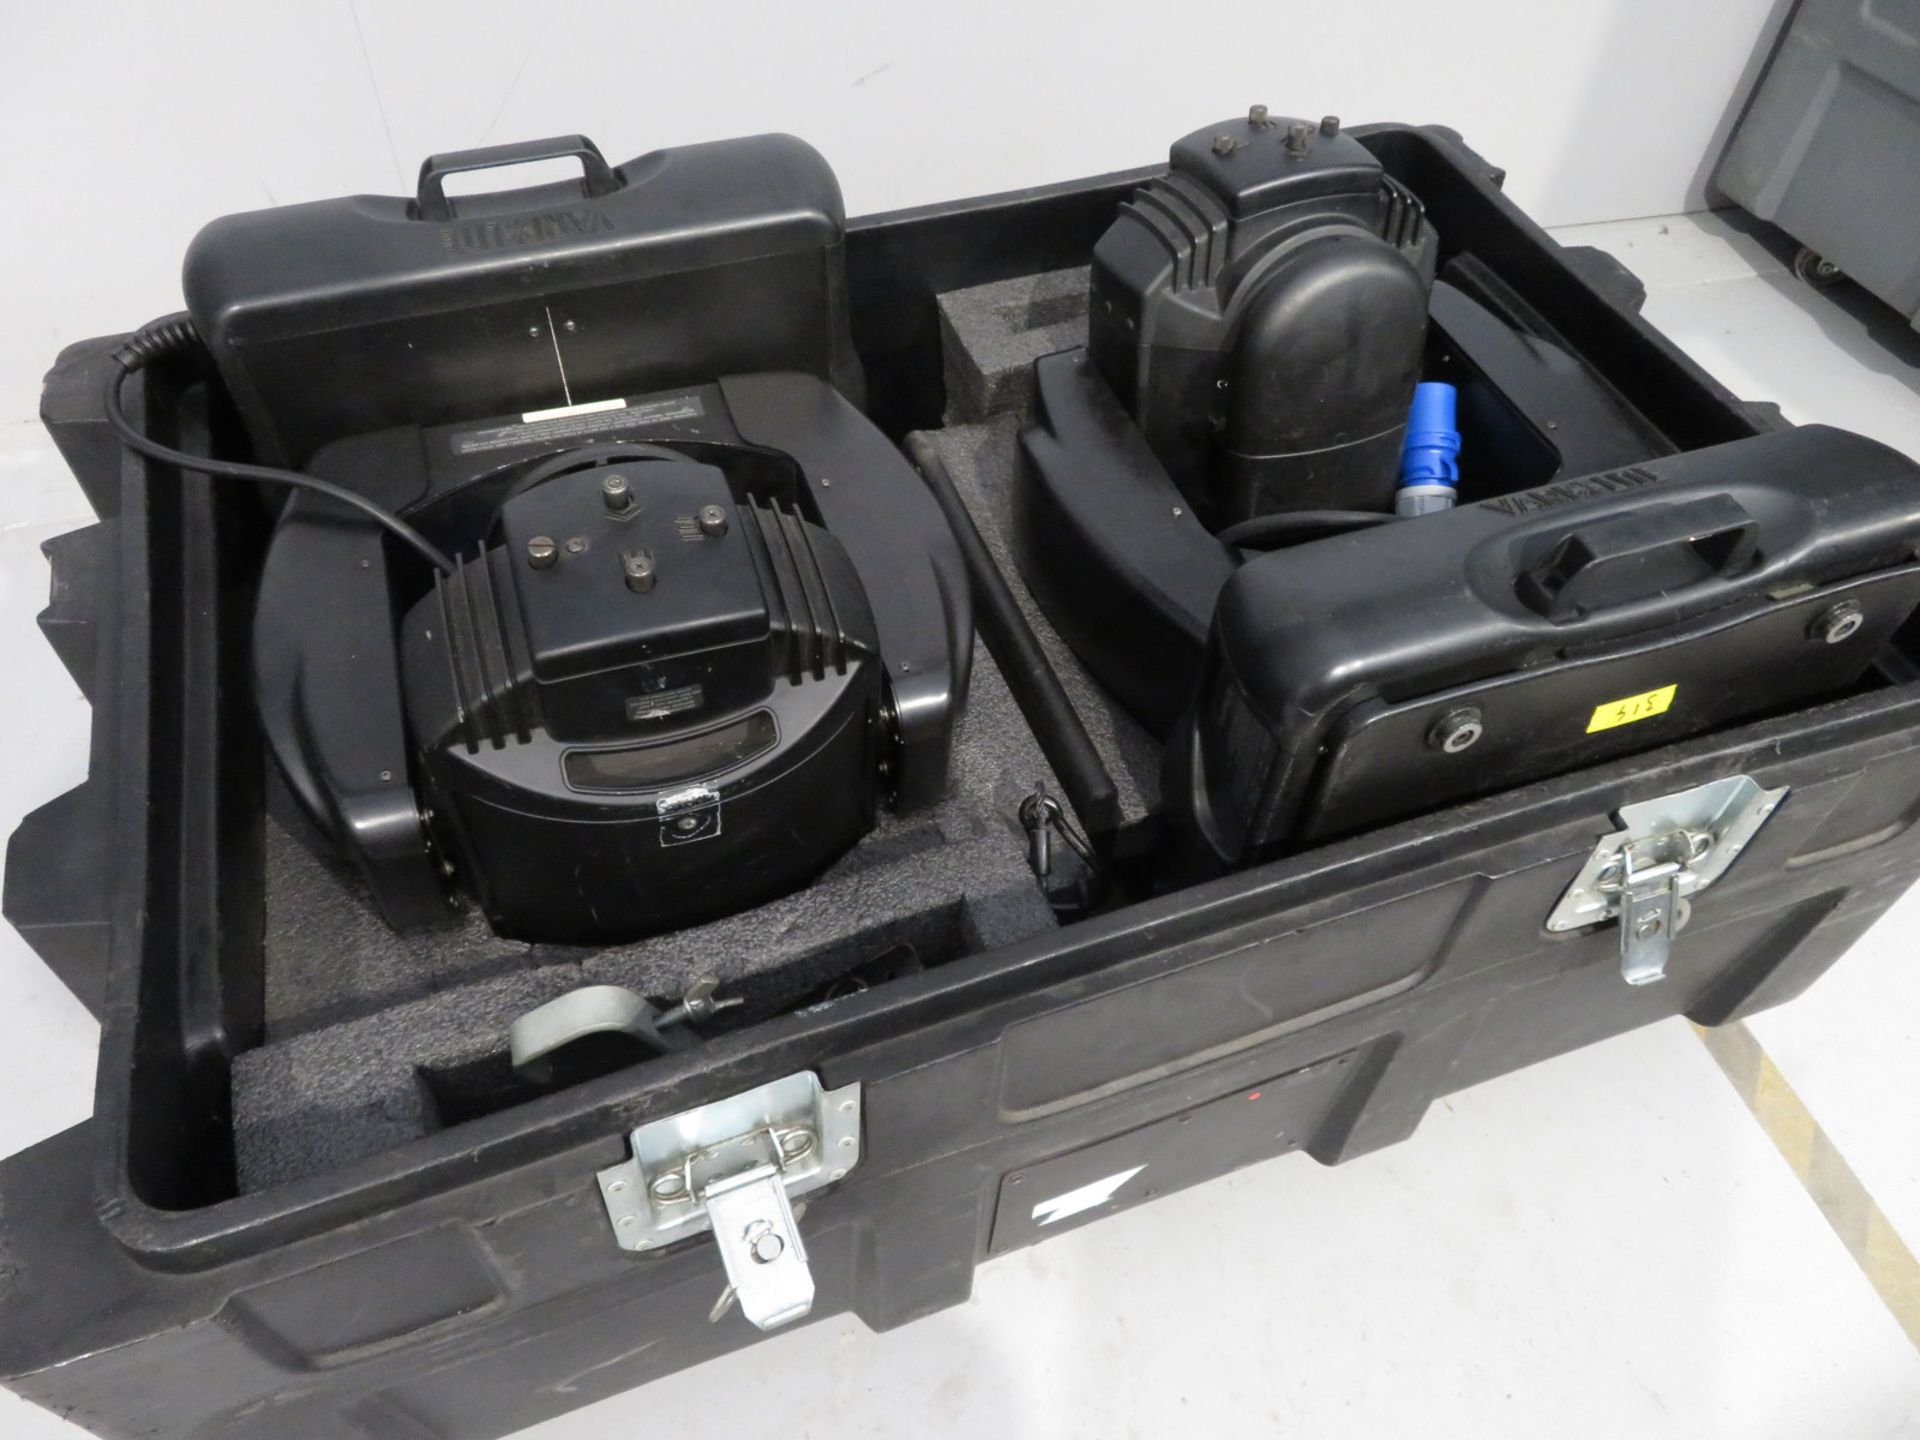 Pair of Varilite VL2402 Wash in flightcase. Includes hanging clamps and safety bonds. Work - Image 8 of 8